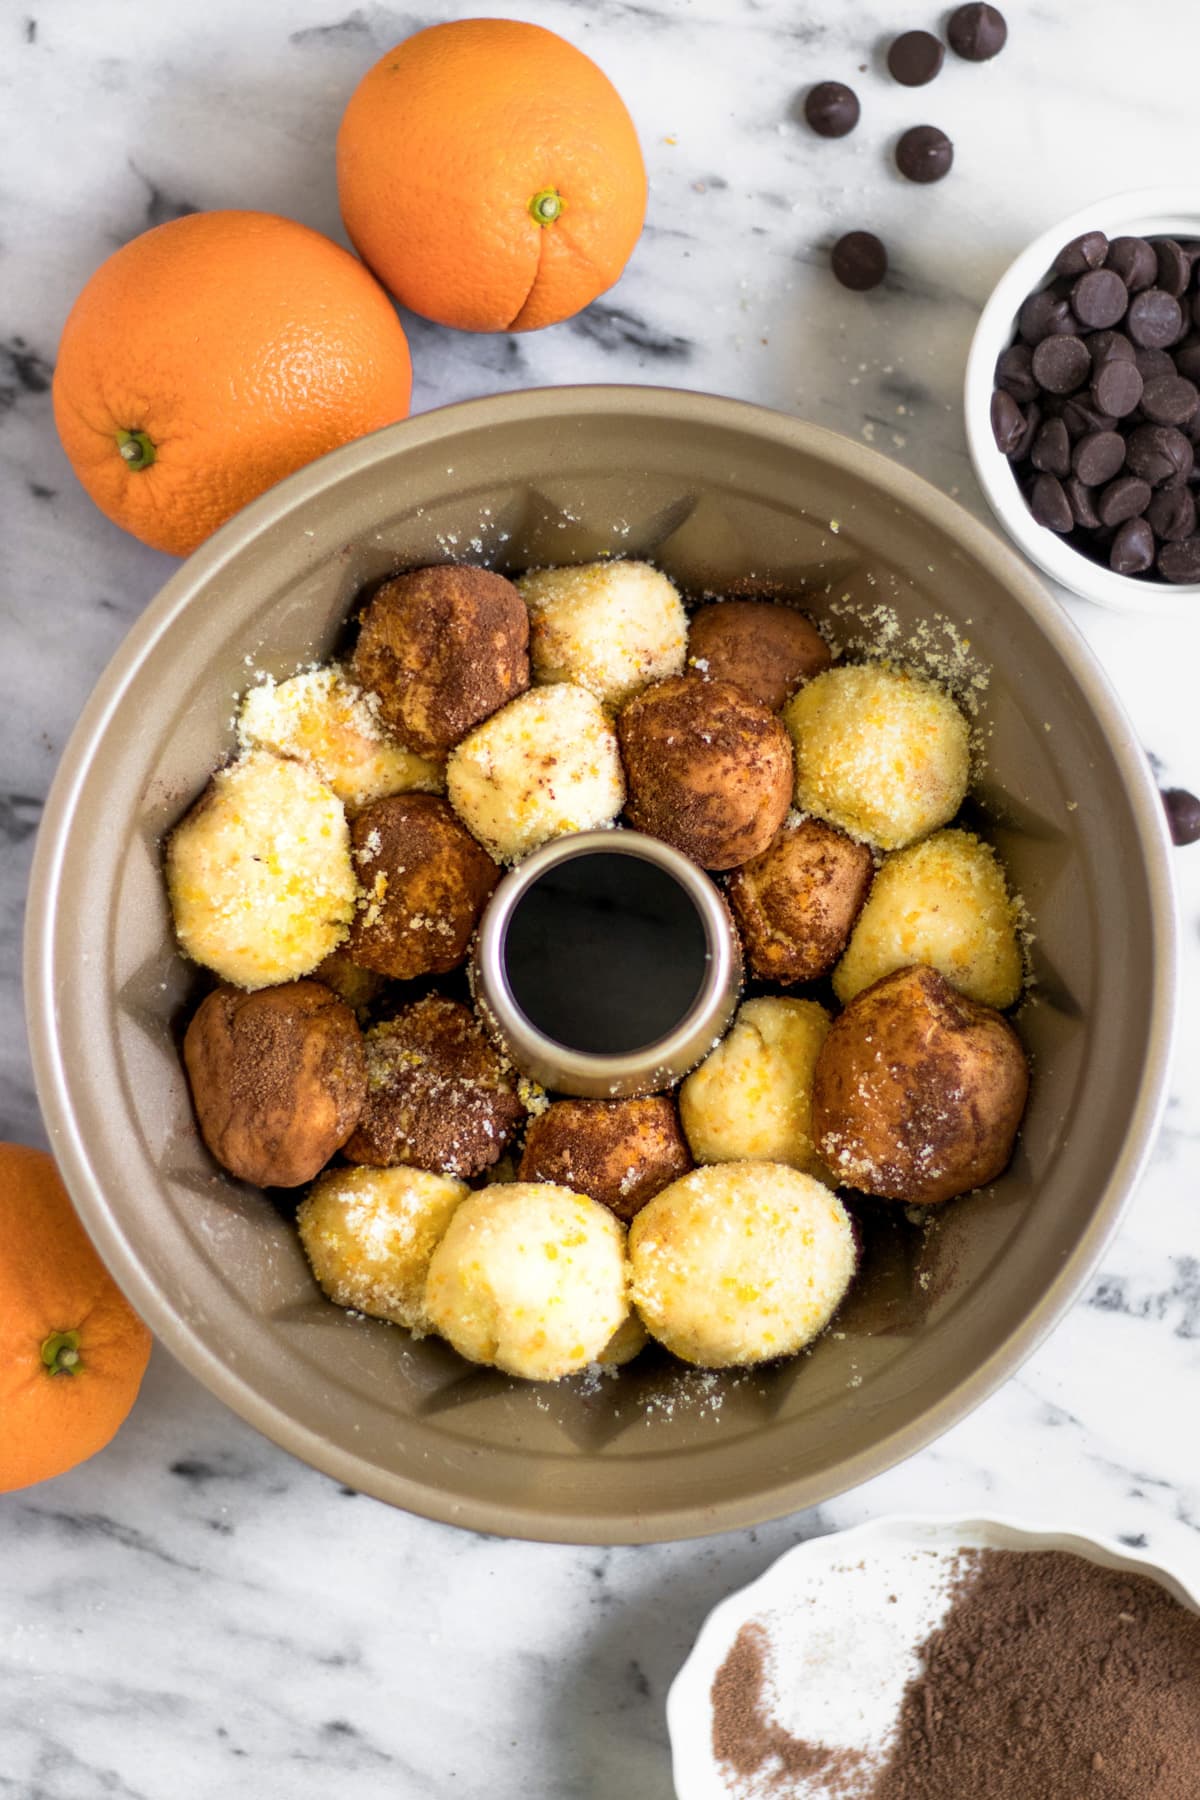 overnight prep for an easy monkey bread recipe with chocolate and orange flavors (or whatever floats your boat!) for the holidays! by top Houston lifestyle blogger Ashley Rose of Sugar & Cloth - #recipe #easy #christmas #holidays #quickrecipes #easyrecipe #holiday #winter